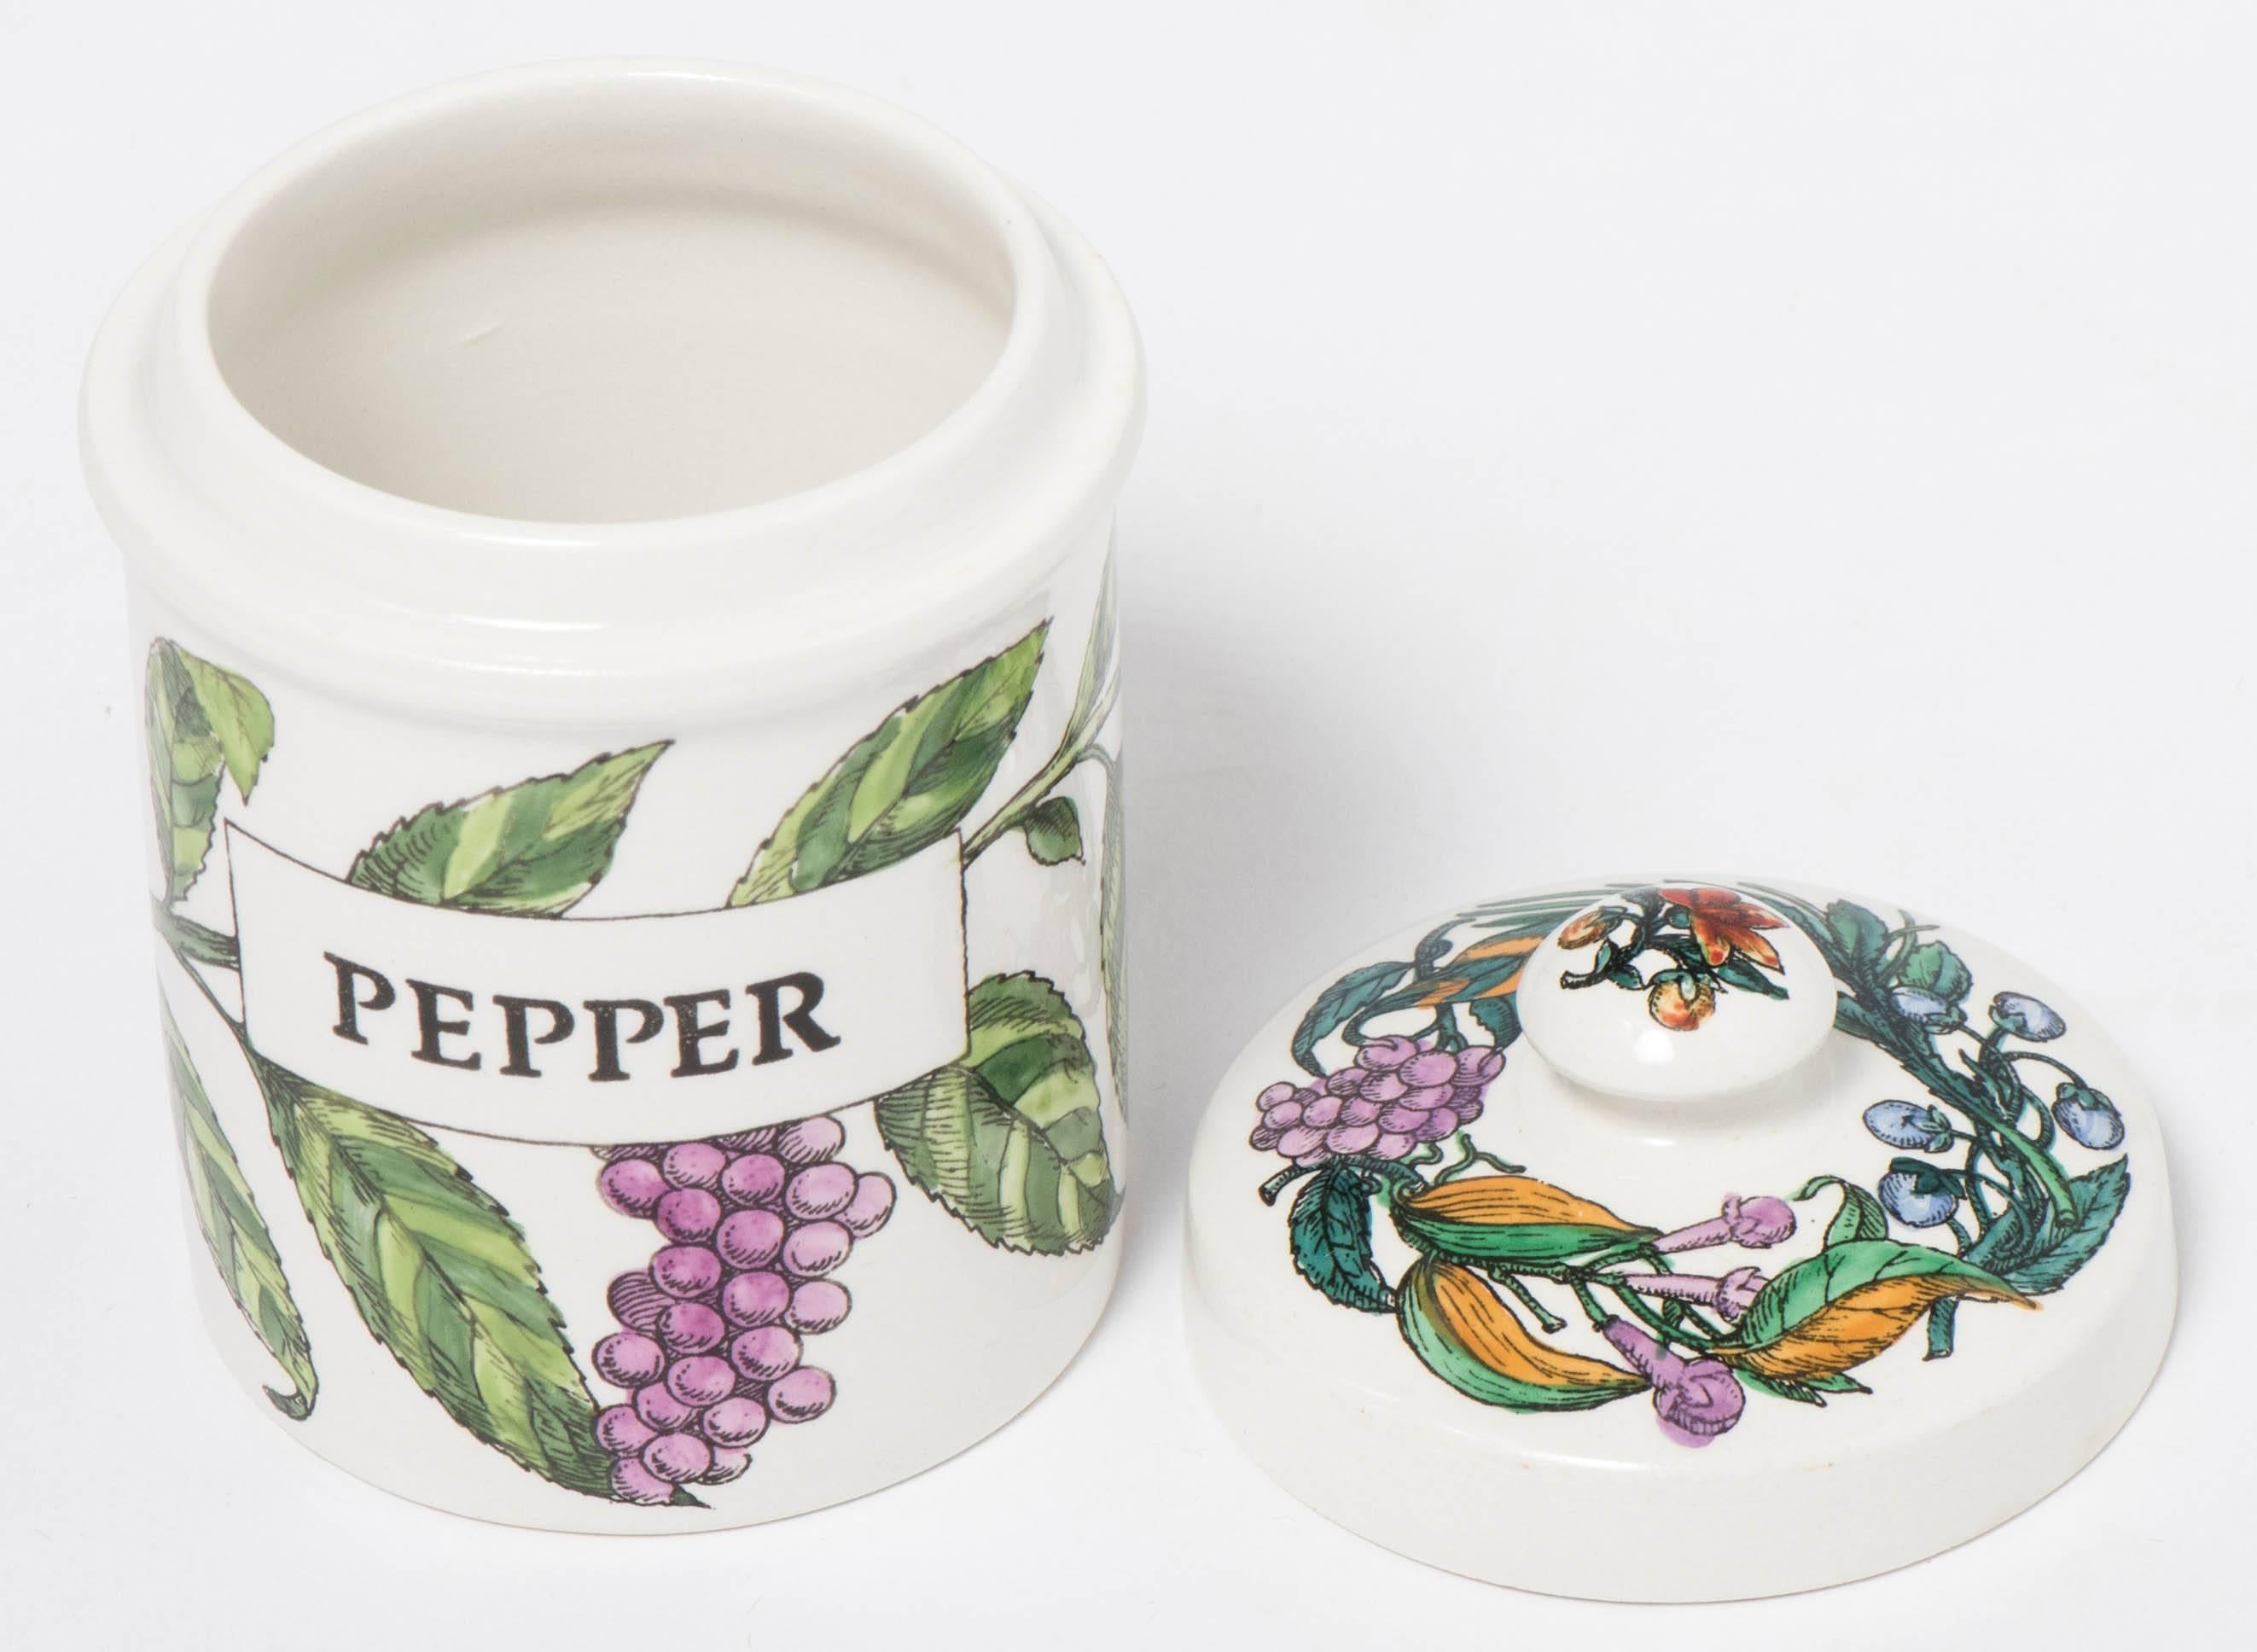 An early porcelain jar by Piero Fornasetti.
“pepper”
Lithographically printed and hand-painted.
Mark to base.
Italy, circa 1960.
Measures: 12 cm high x 8.5 cm diameter.
 